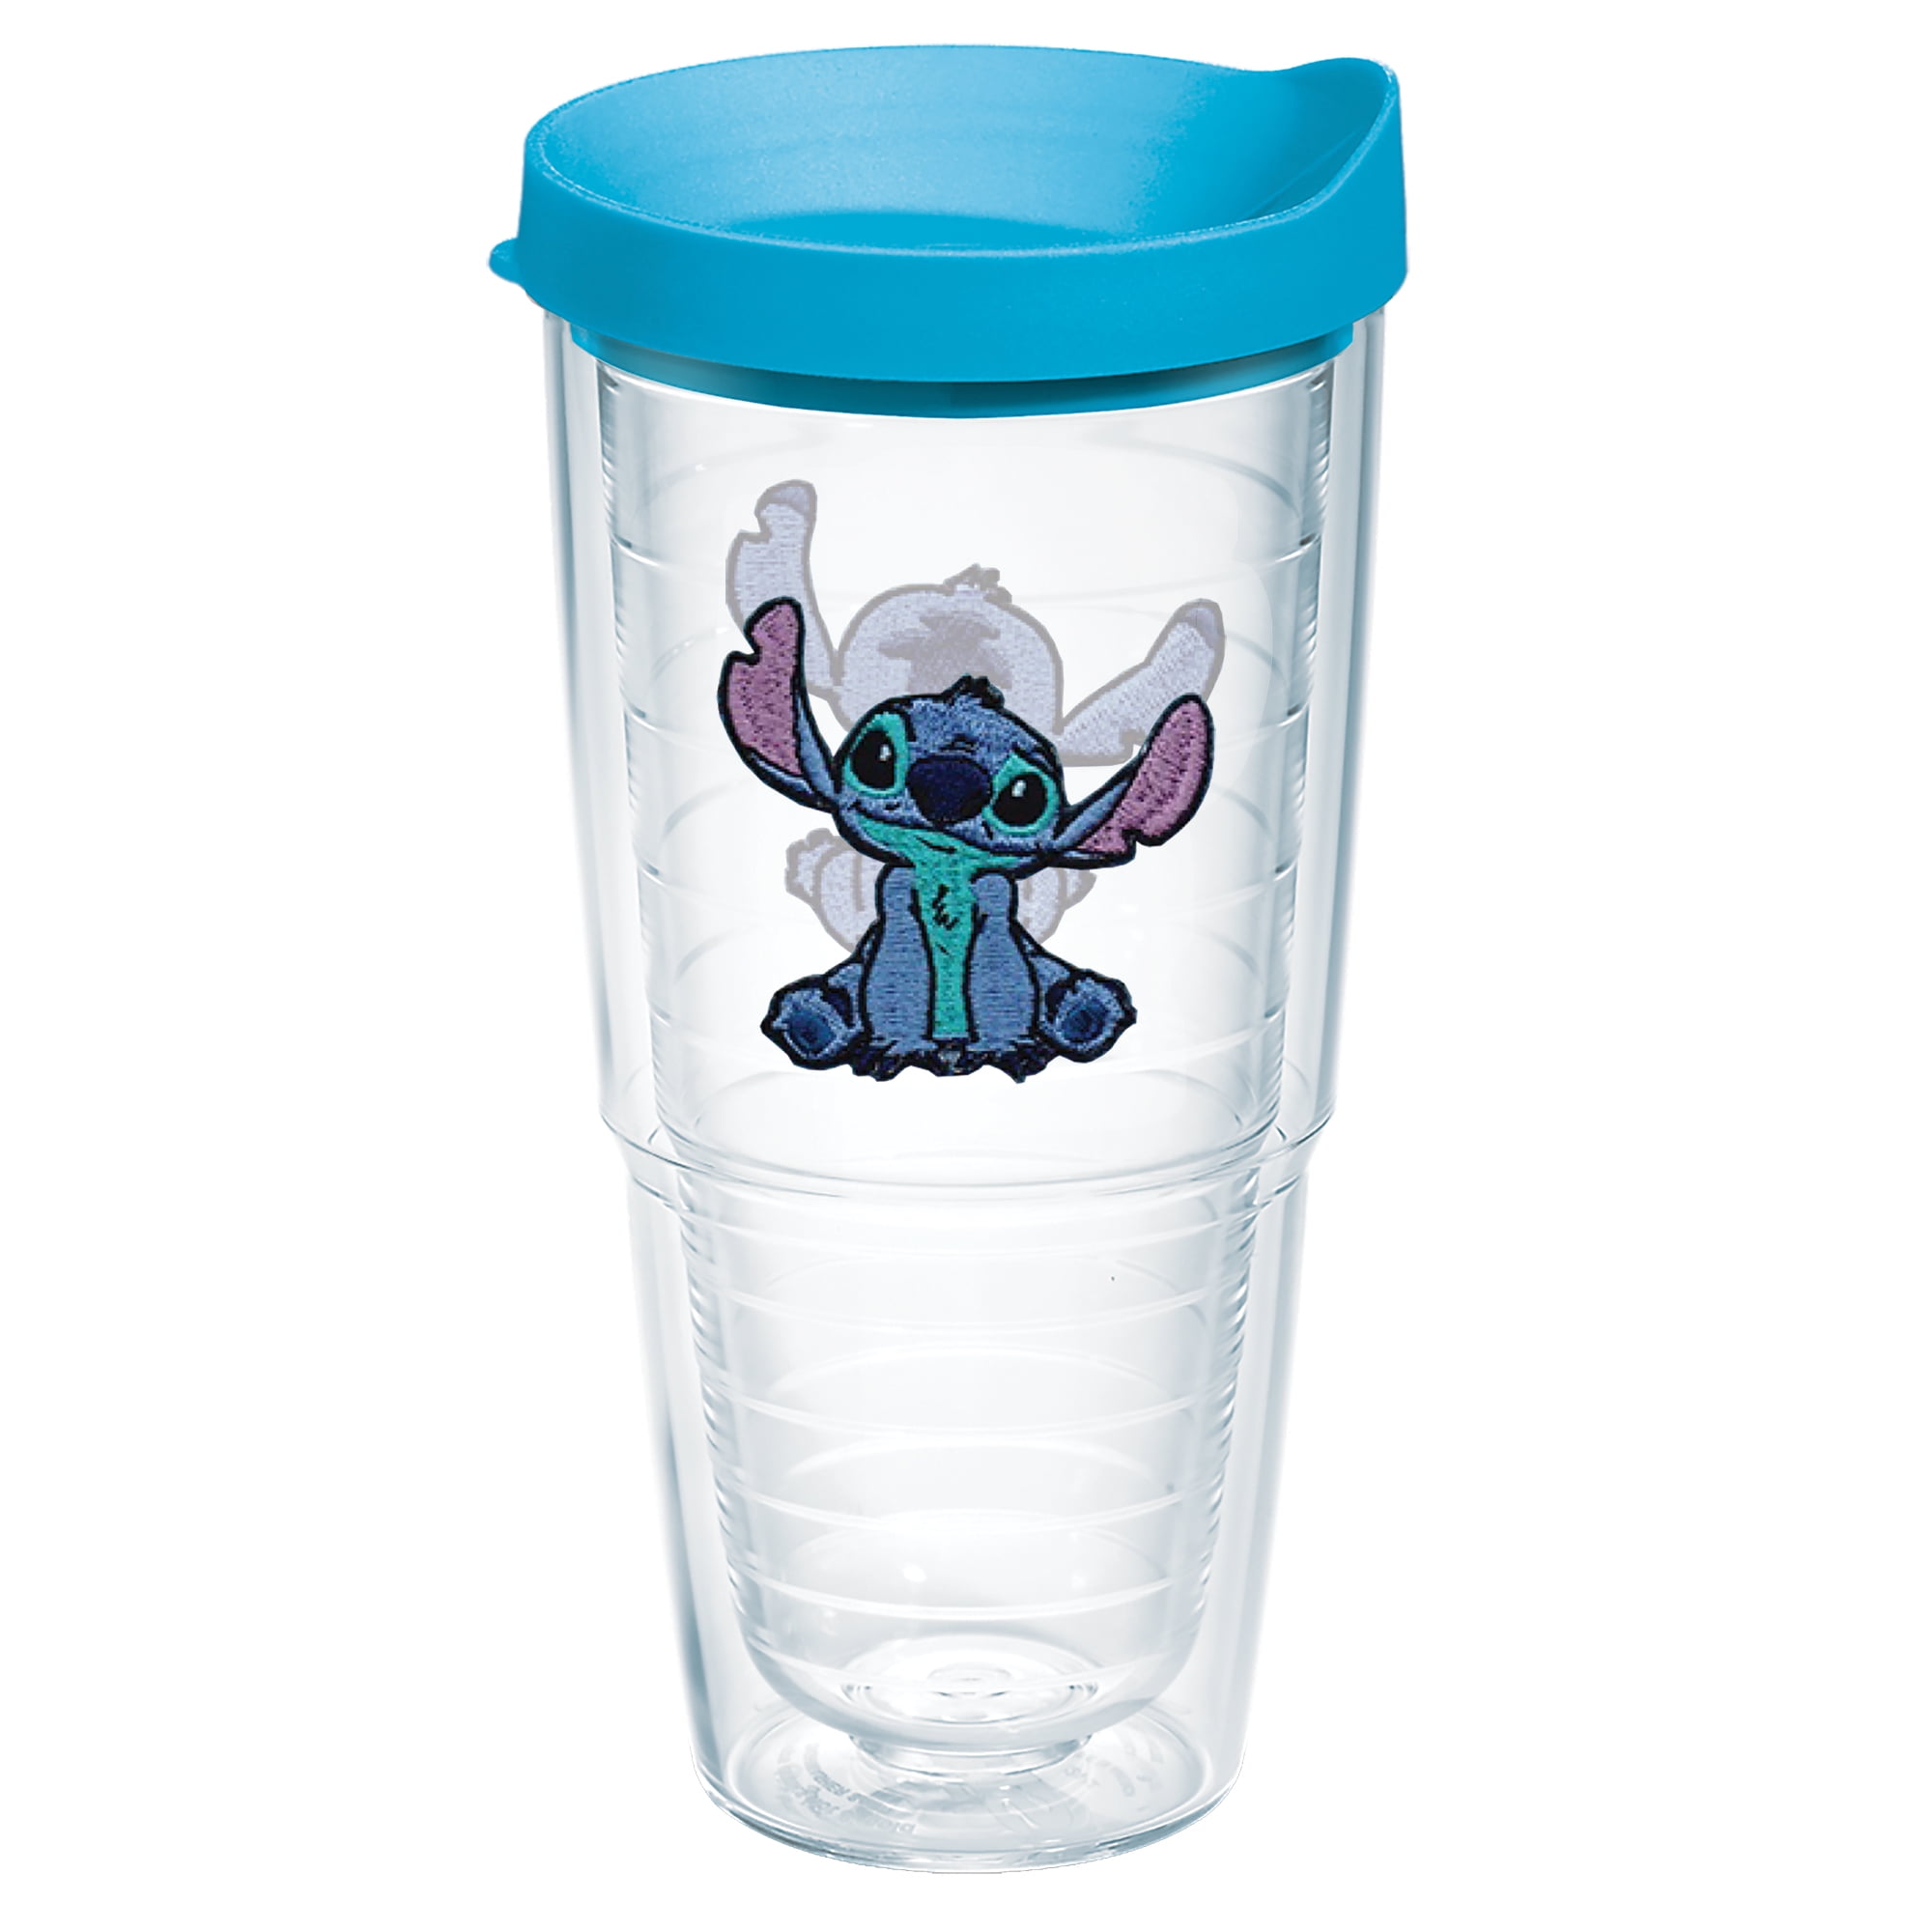 Lilo and Stitch 10 Ounce Stainless Steel Tumbler With Lid